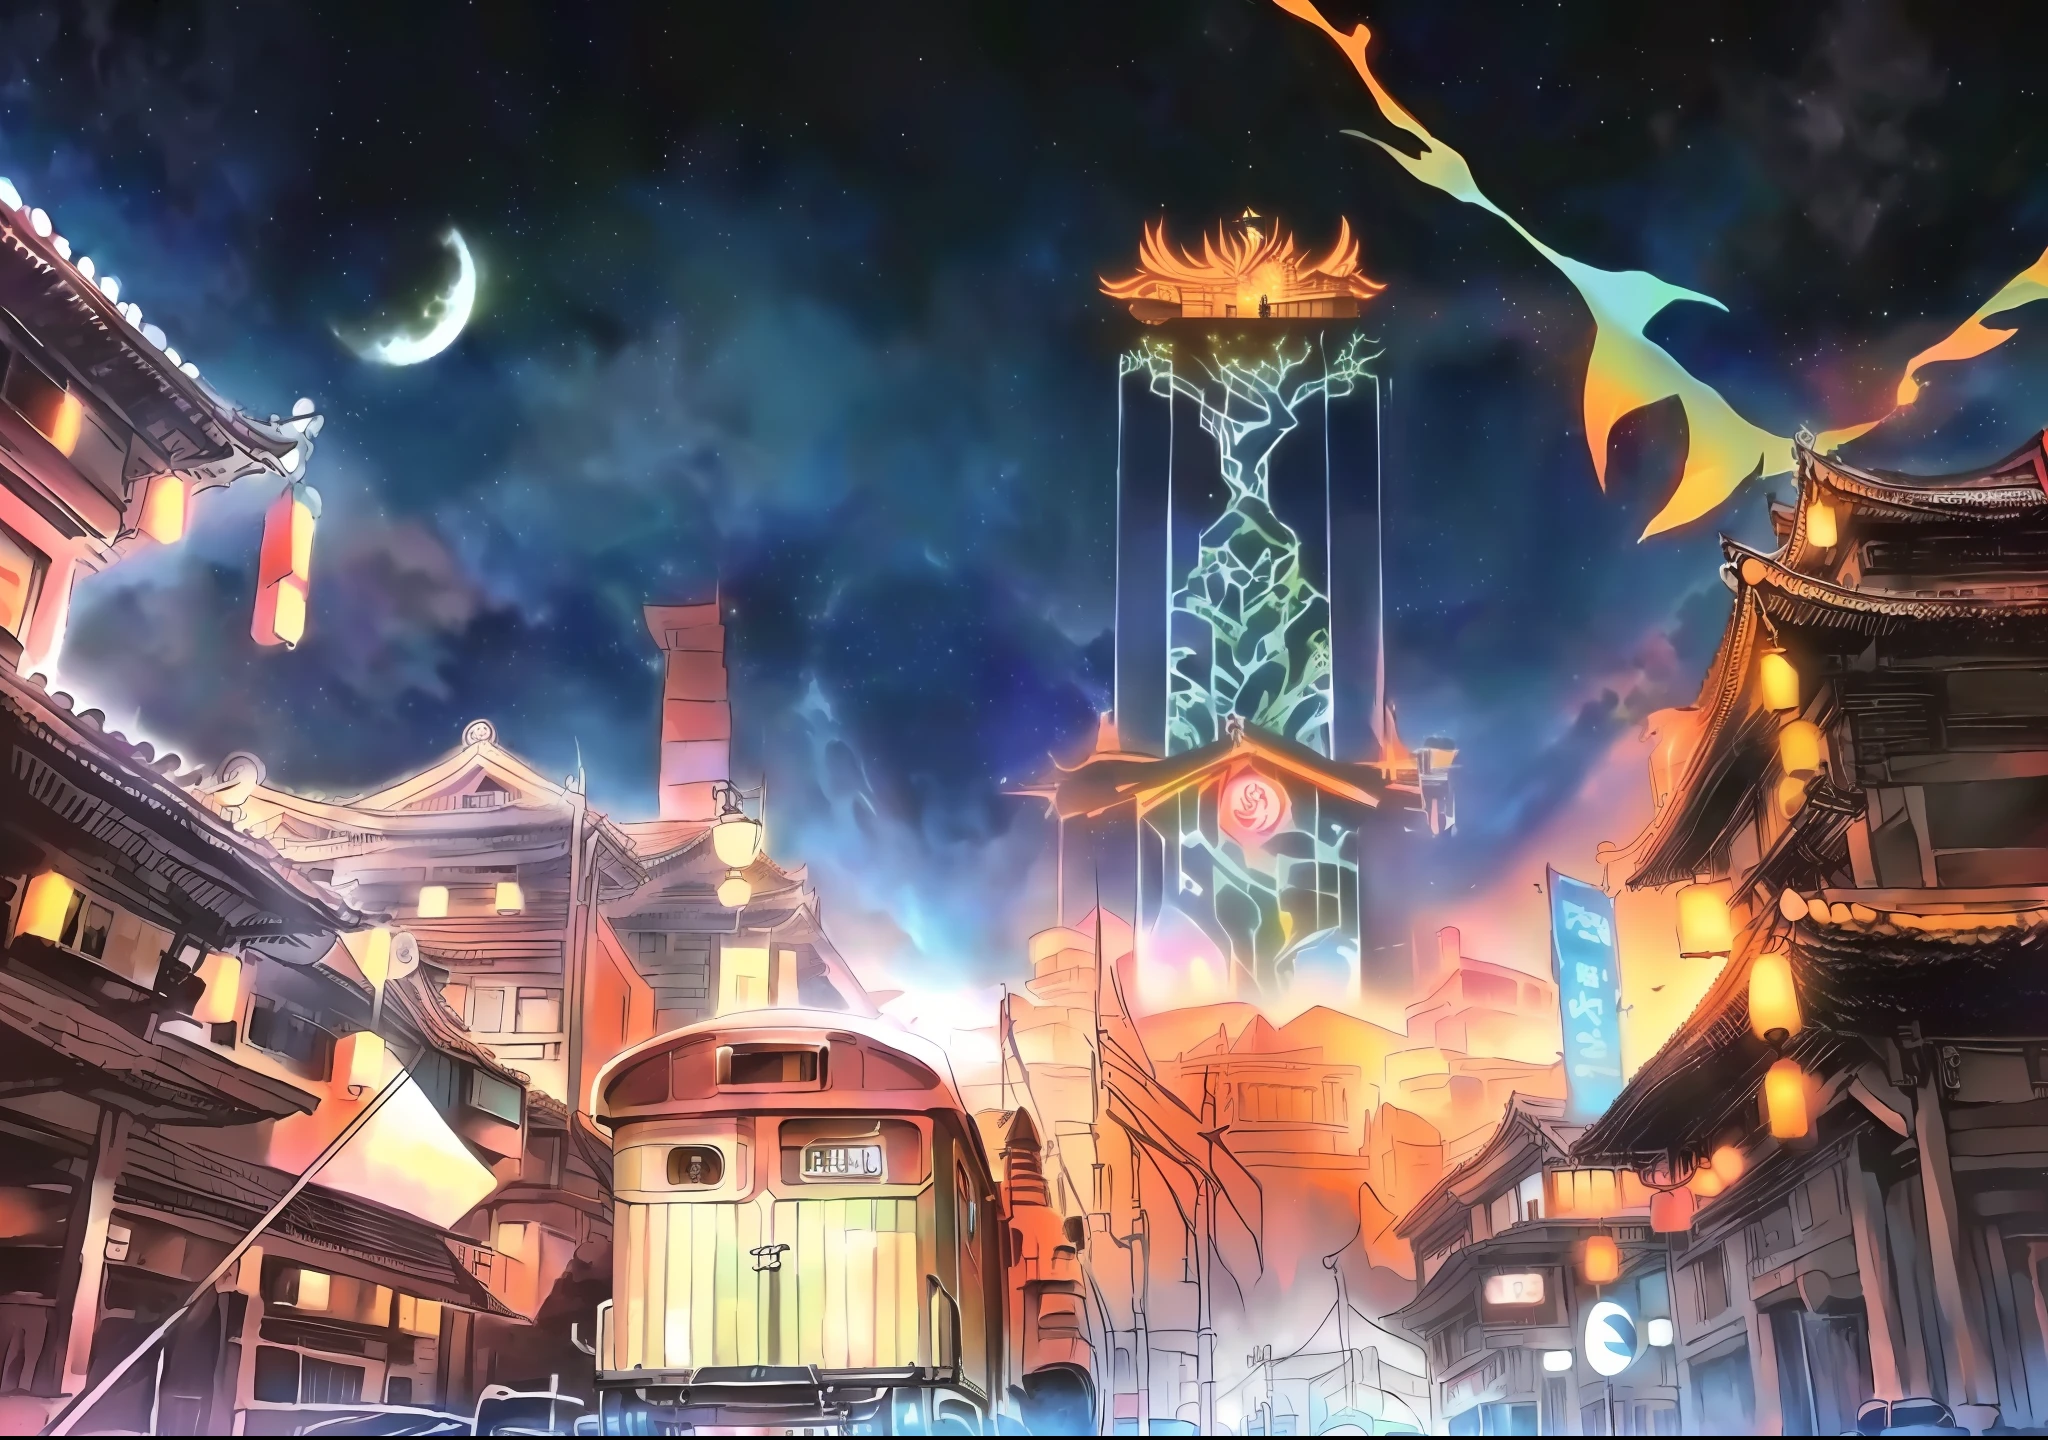 anime scene of a street with a train and a building, colorful kitsune city, colorful anime movie background, Best anime 4k konachan wallpaper, Onmyoji detailed art, anime land of the lustrous, traditional japanese concept art, anime art nouveau cosmic display, summer festival night, anime style cityscape, Anime fantasy artwork, anime”, “ anime, full - view。Classical Chinese night view